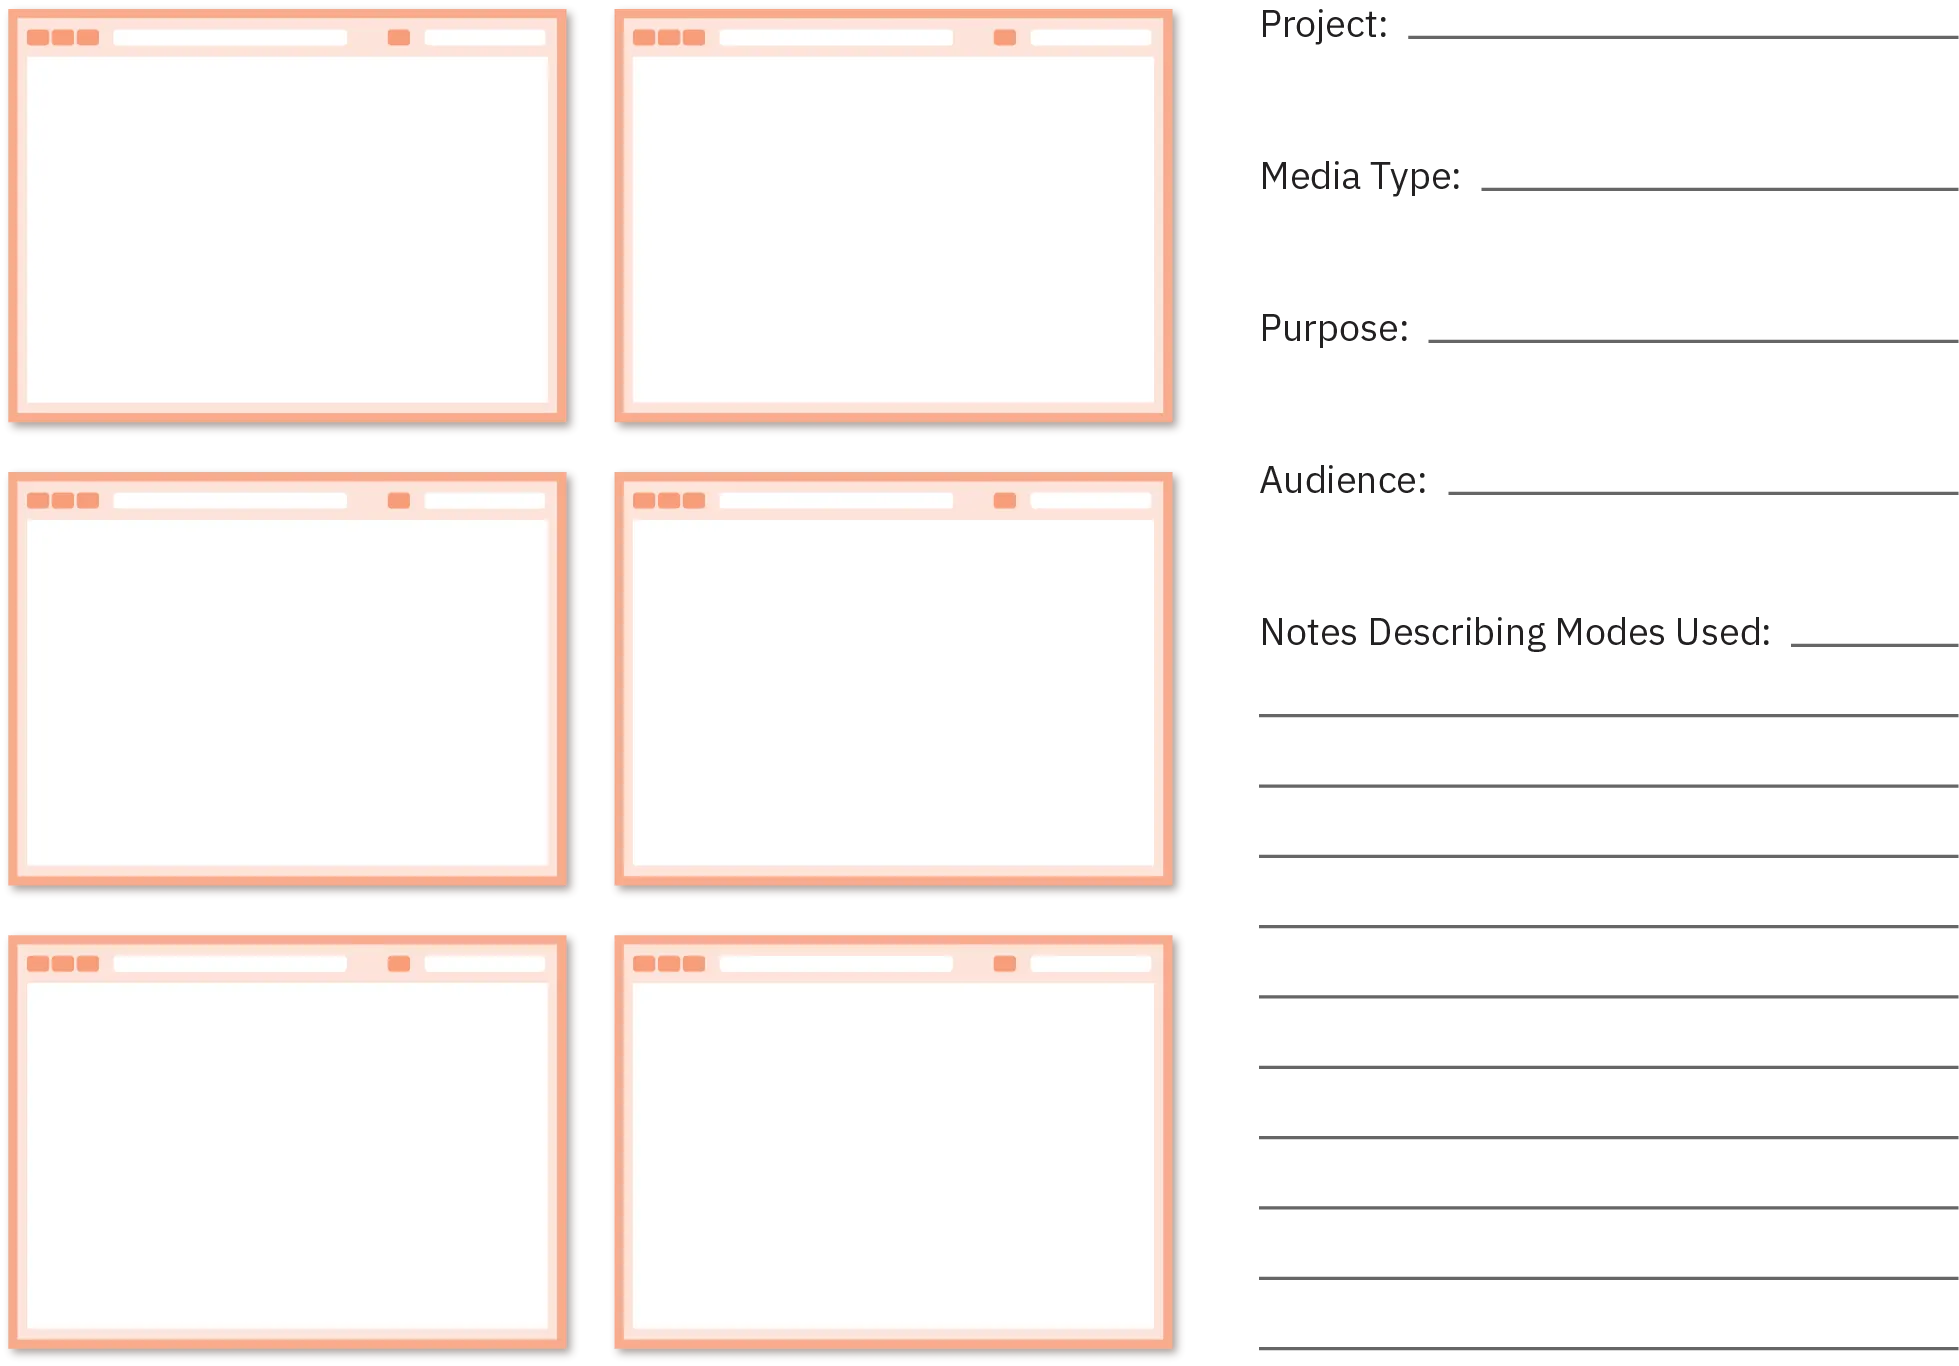 Six empty web pages, with a form showing fields where data can be entered for the project, media type, purpose, audience, and the notes describing the modes used